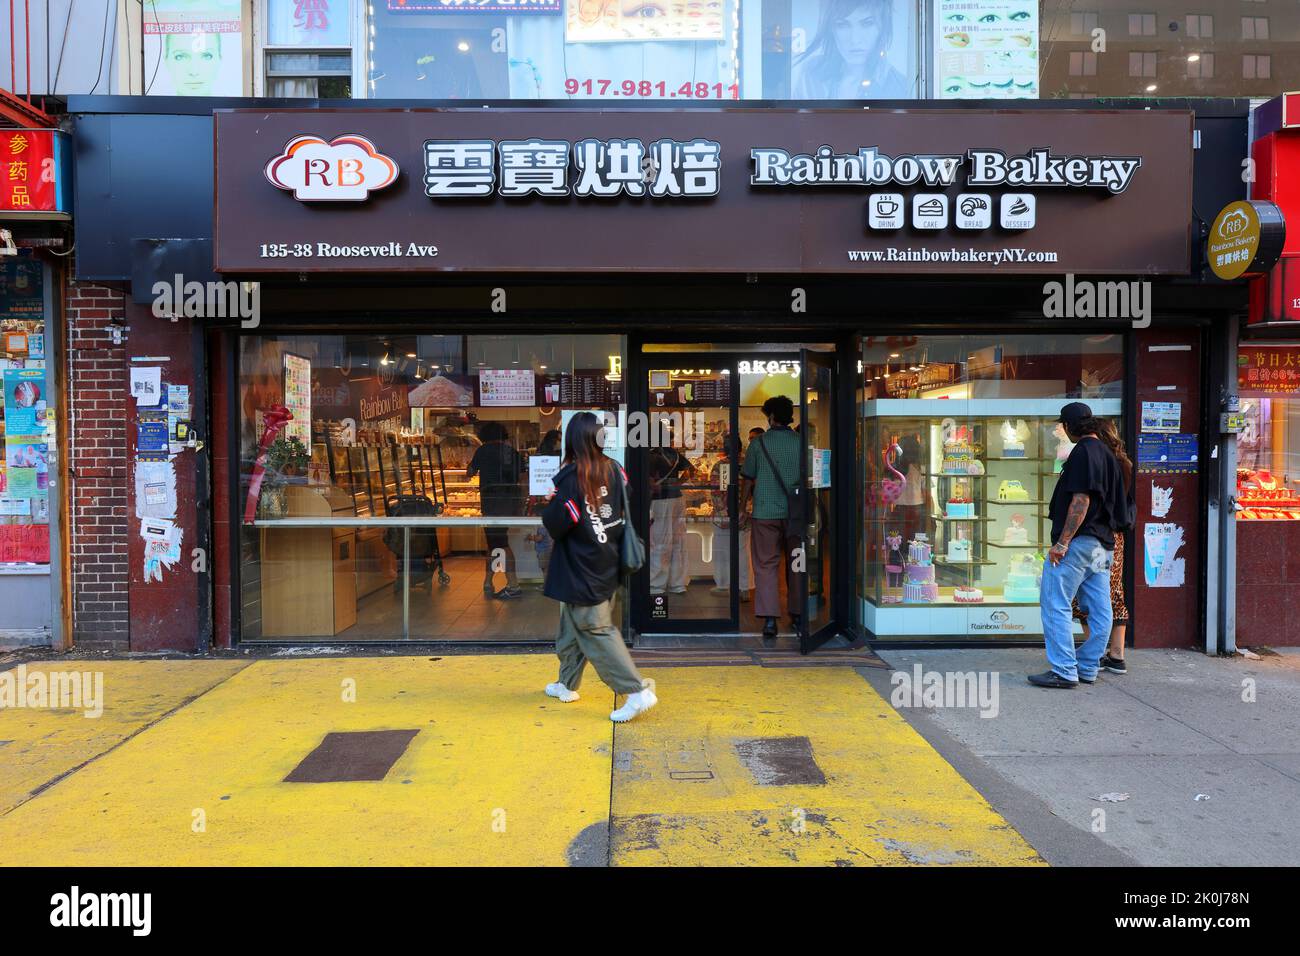 Rainbow Bakery 雲寶餅屋, 135-38 Roosevelt Ave, Queens, New York. NYC storefront photo of a Chinese bakery chain store in Downtown Flushing. Stock Photo